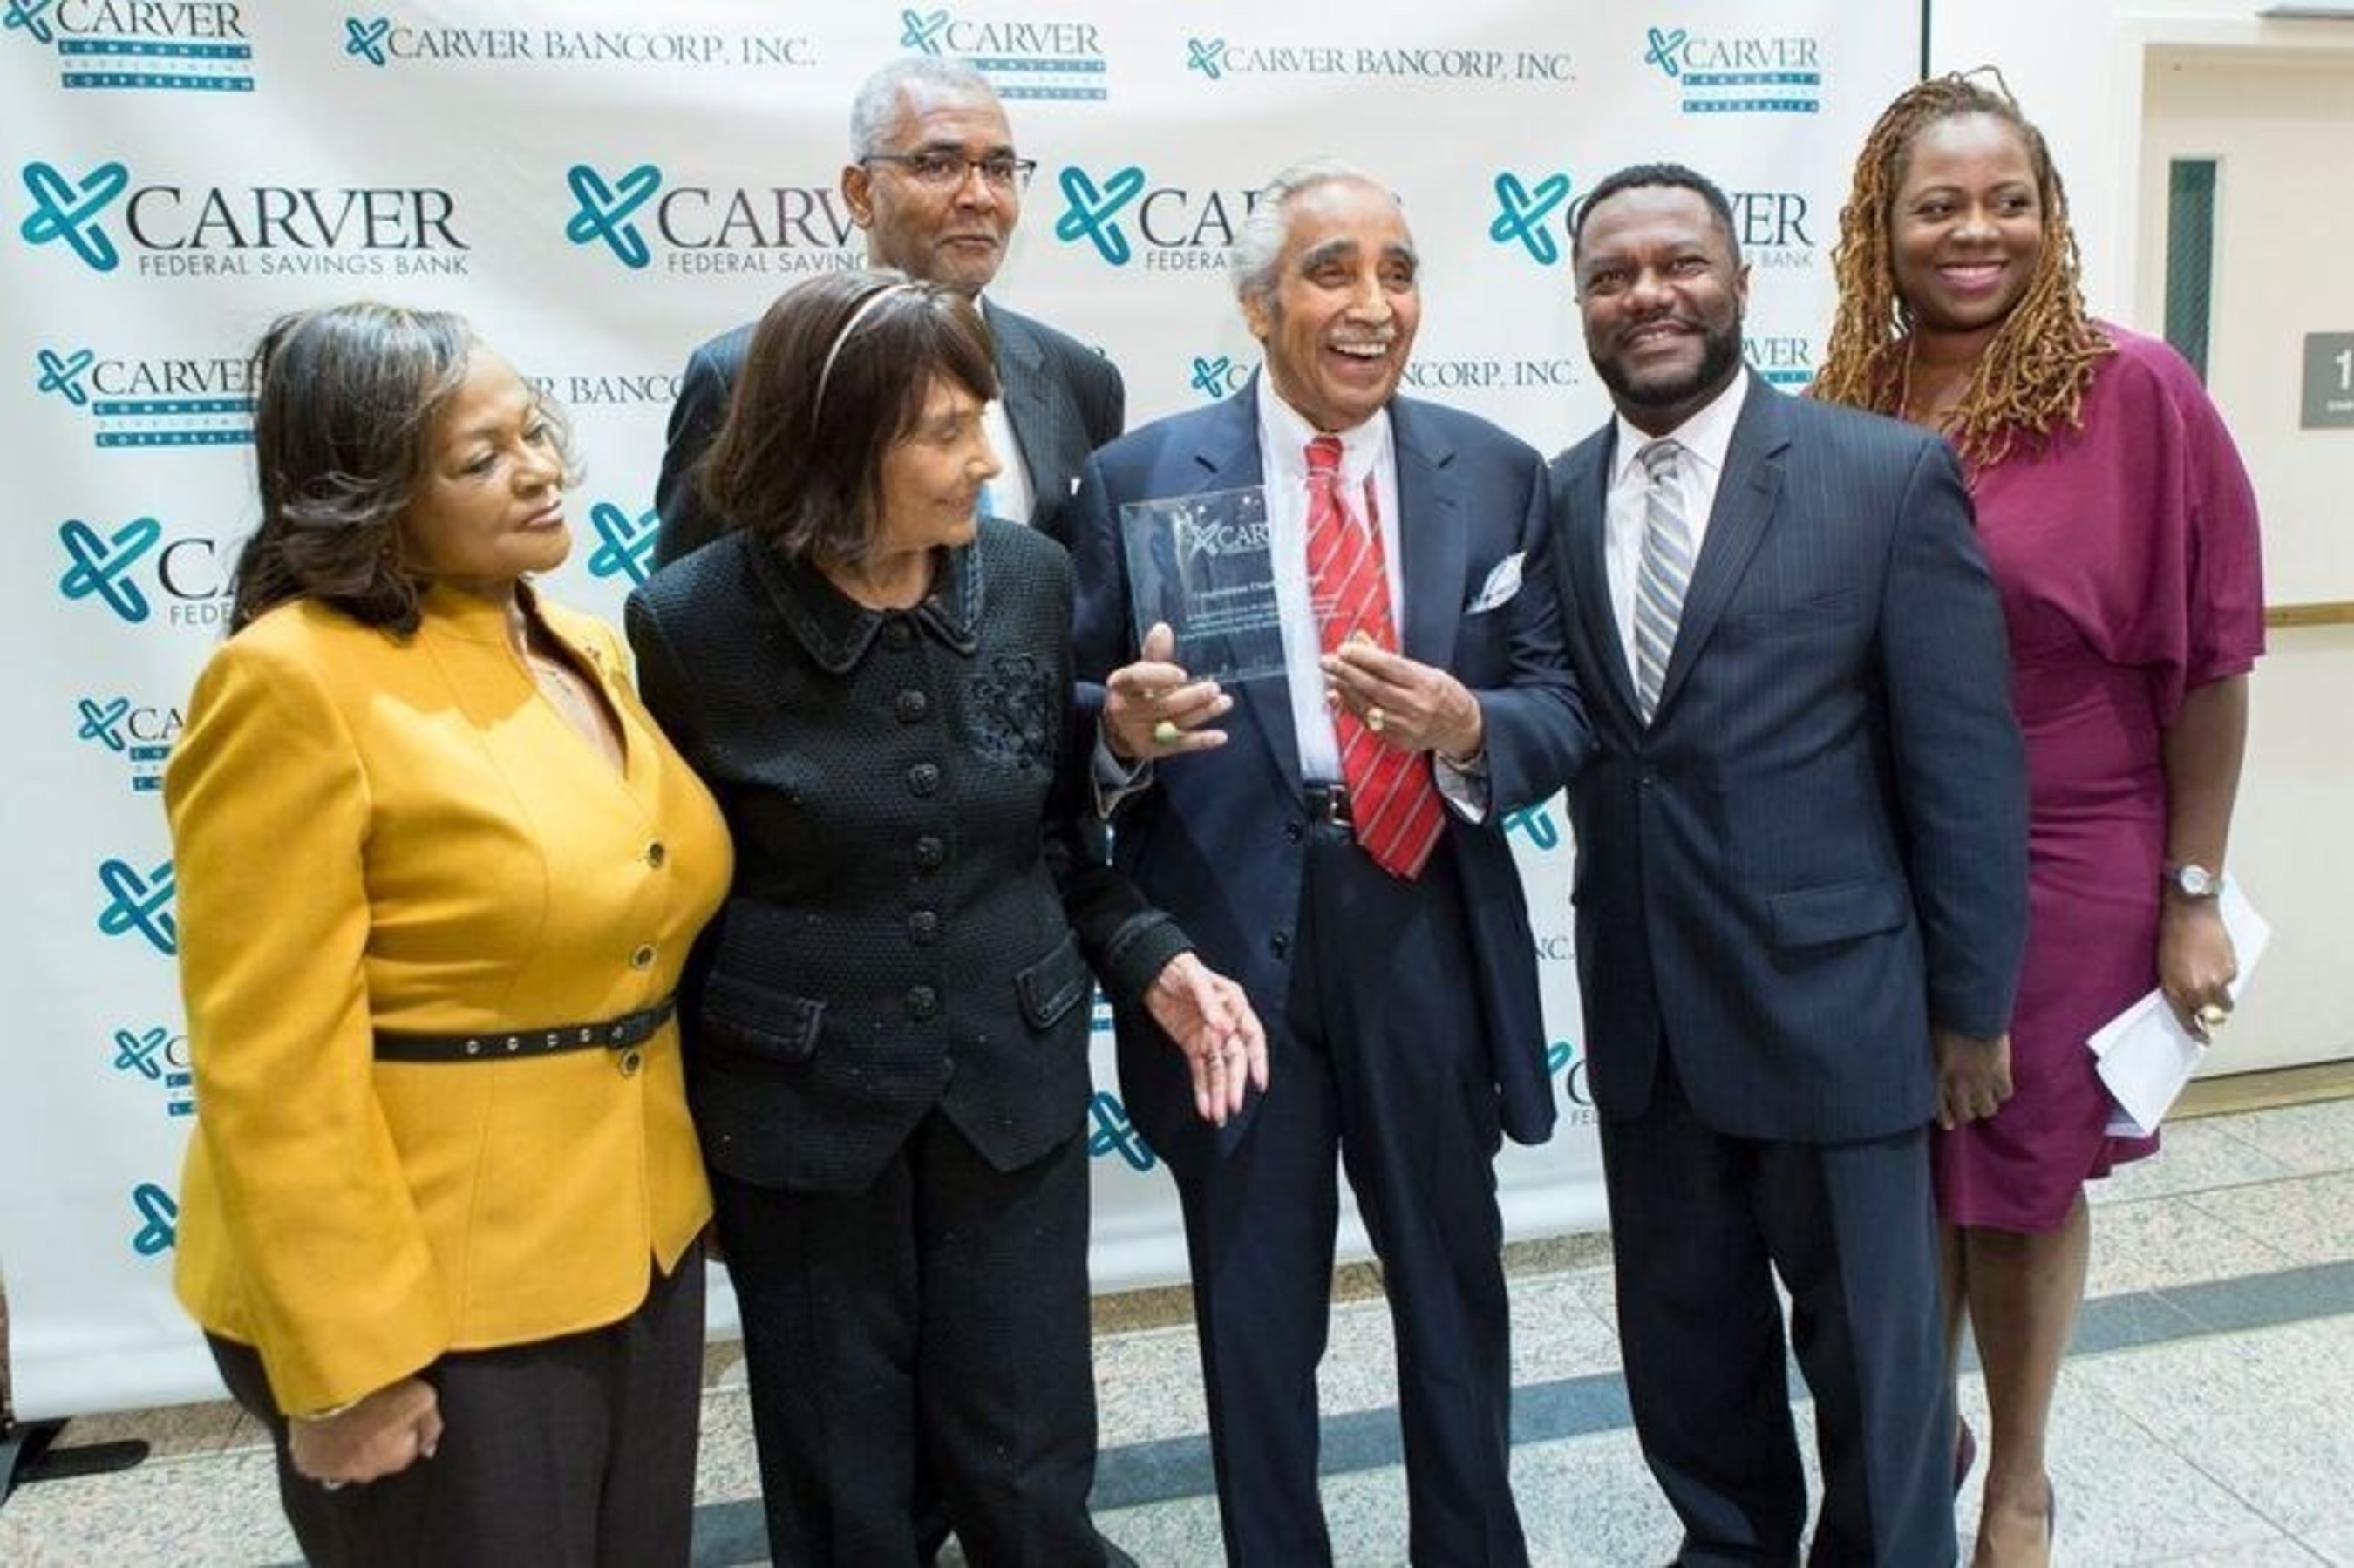 From left to right: Congresswoman Inez Dickens; Alma Rangel; Kenneth Knuckles, Carver Board of Directors, and President & CEO, Upper Manhattan Empowerment Zone; Congressman Charles B. Rangel; Michael T. Pugh, President & CEO, Carver Federal Savings Bank; Blondel Pinnock, SVP, Chief Lending Officer, Carver Federal Savings Bank